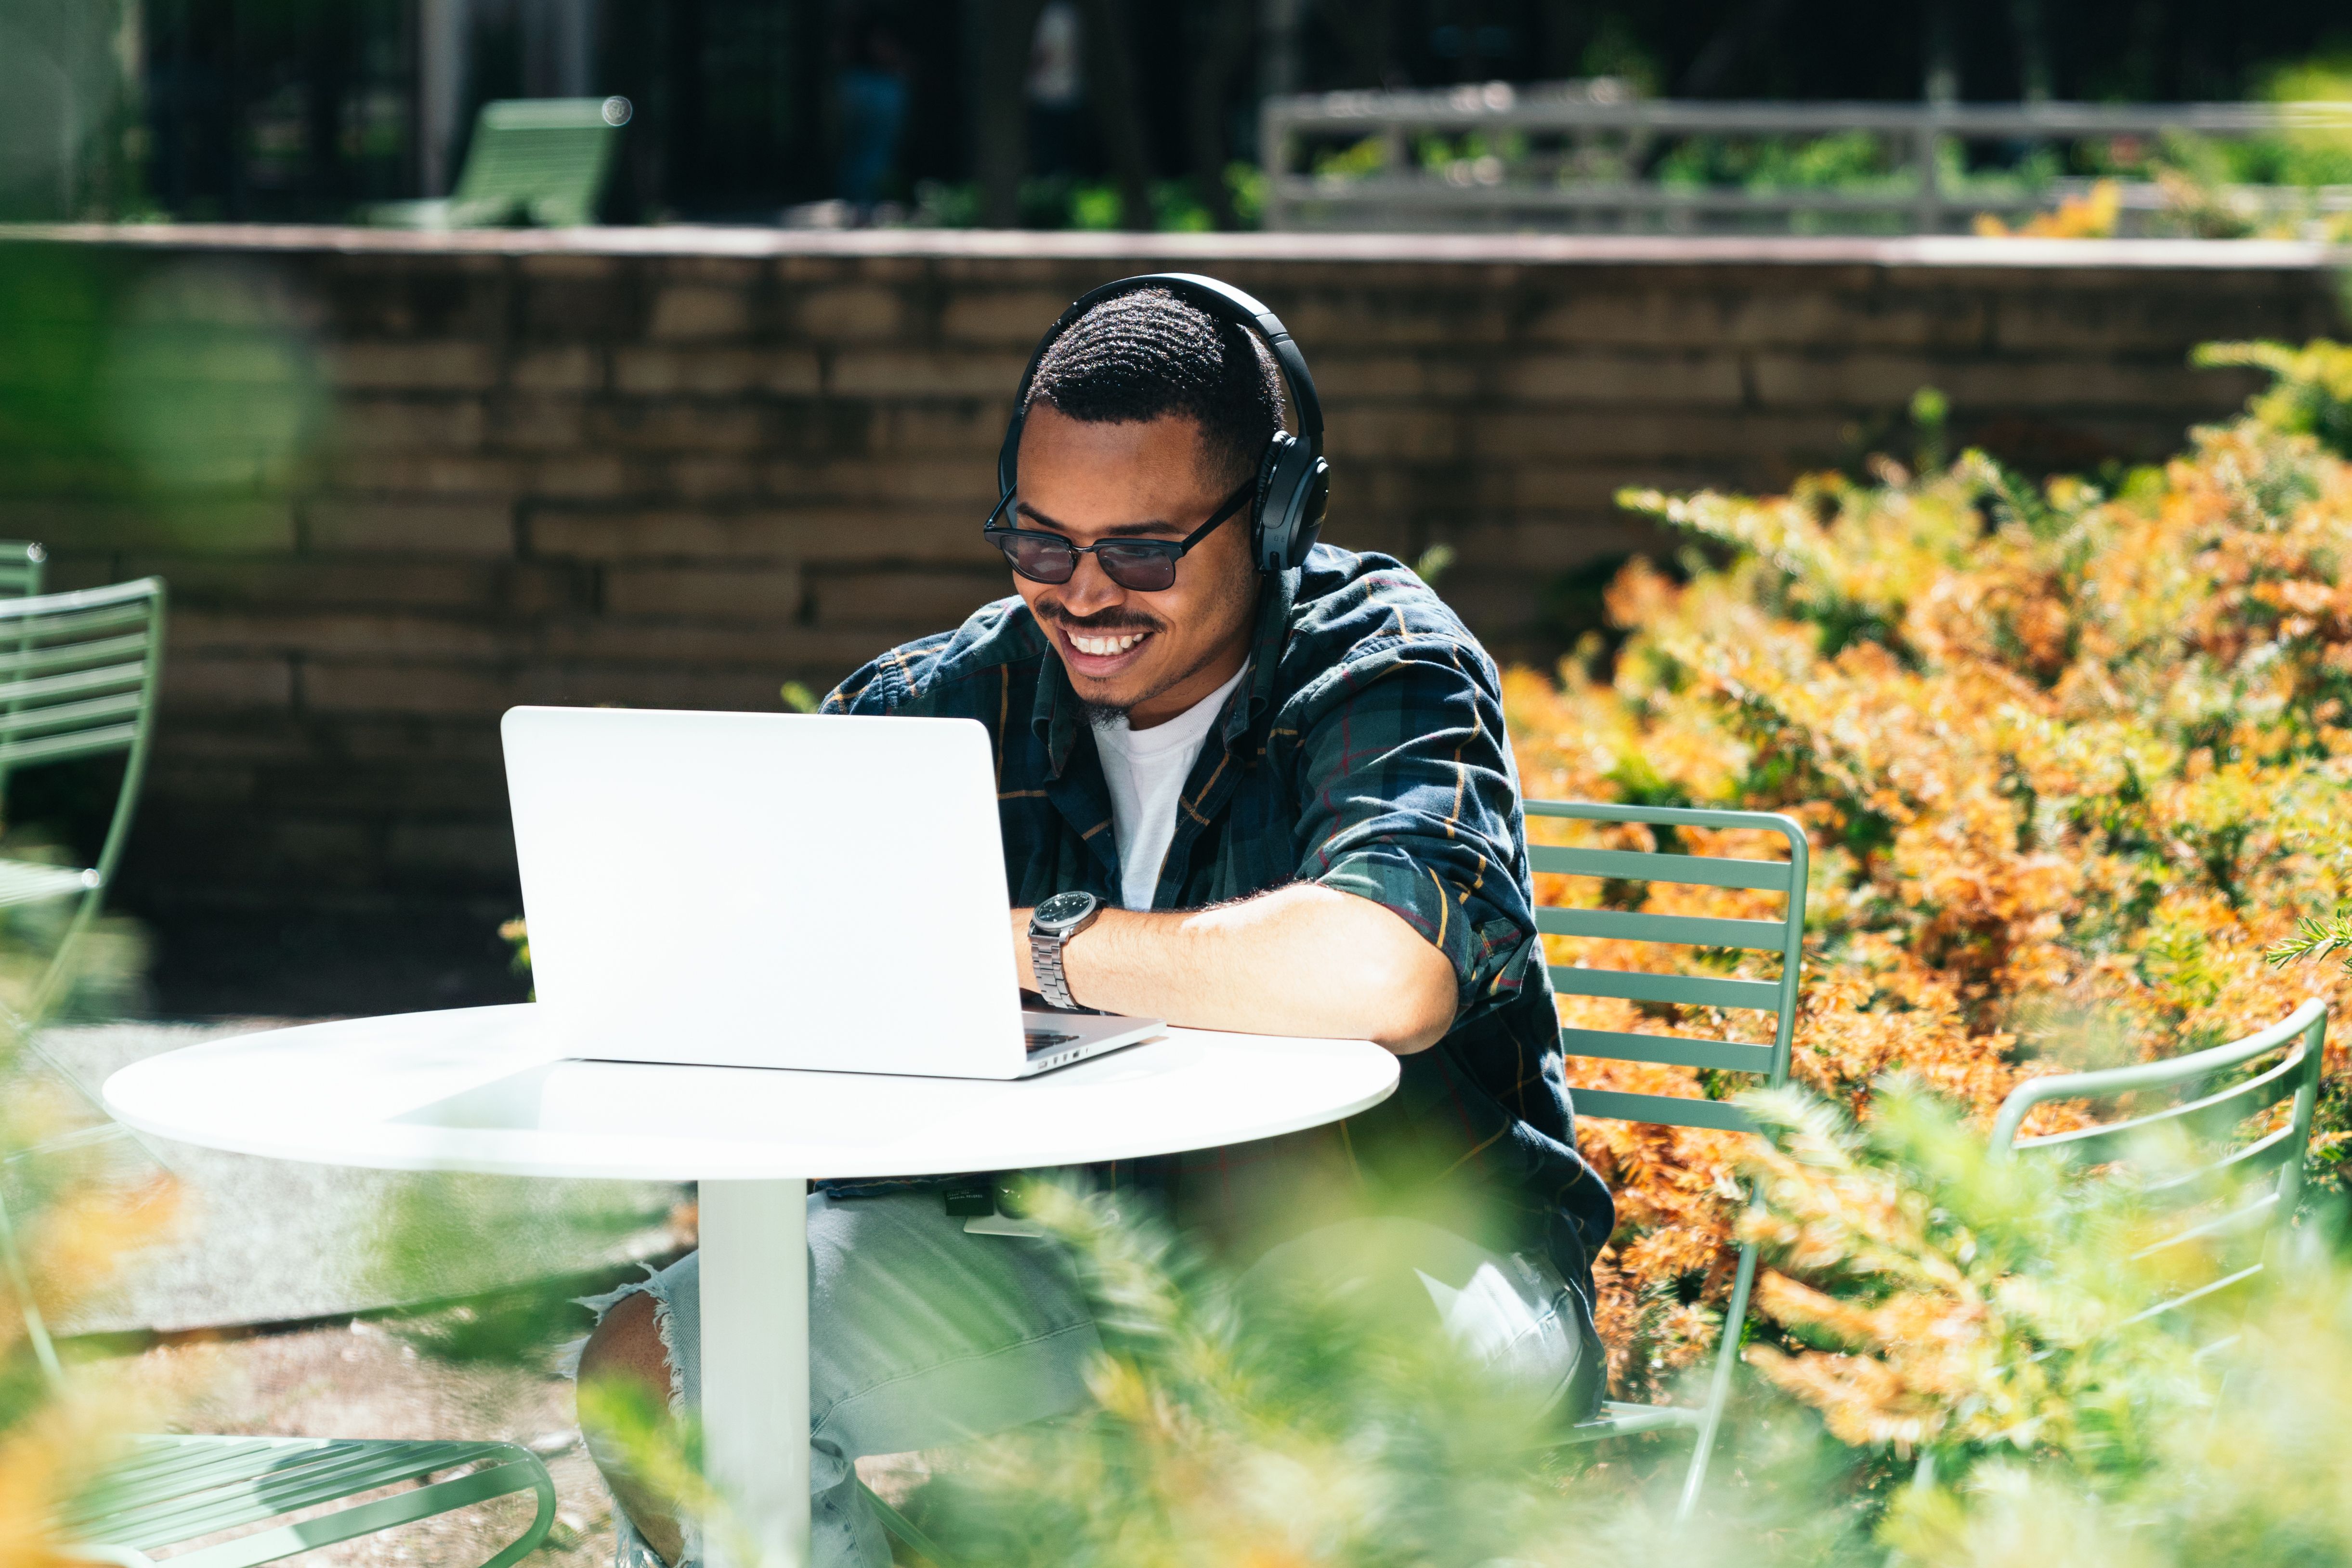 A person wearing headphones and sunglasses sat on table outside, working on their laptop.